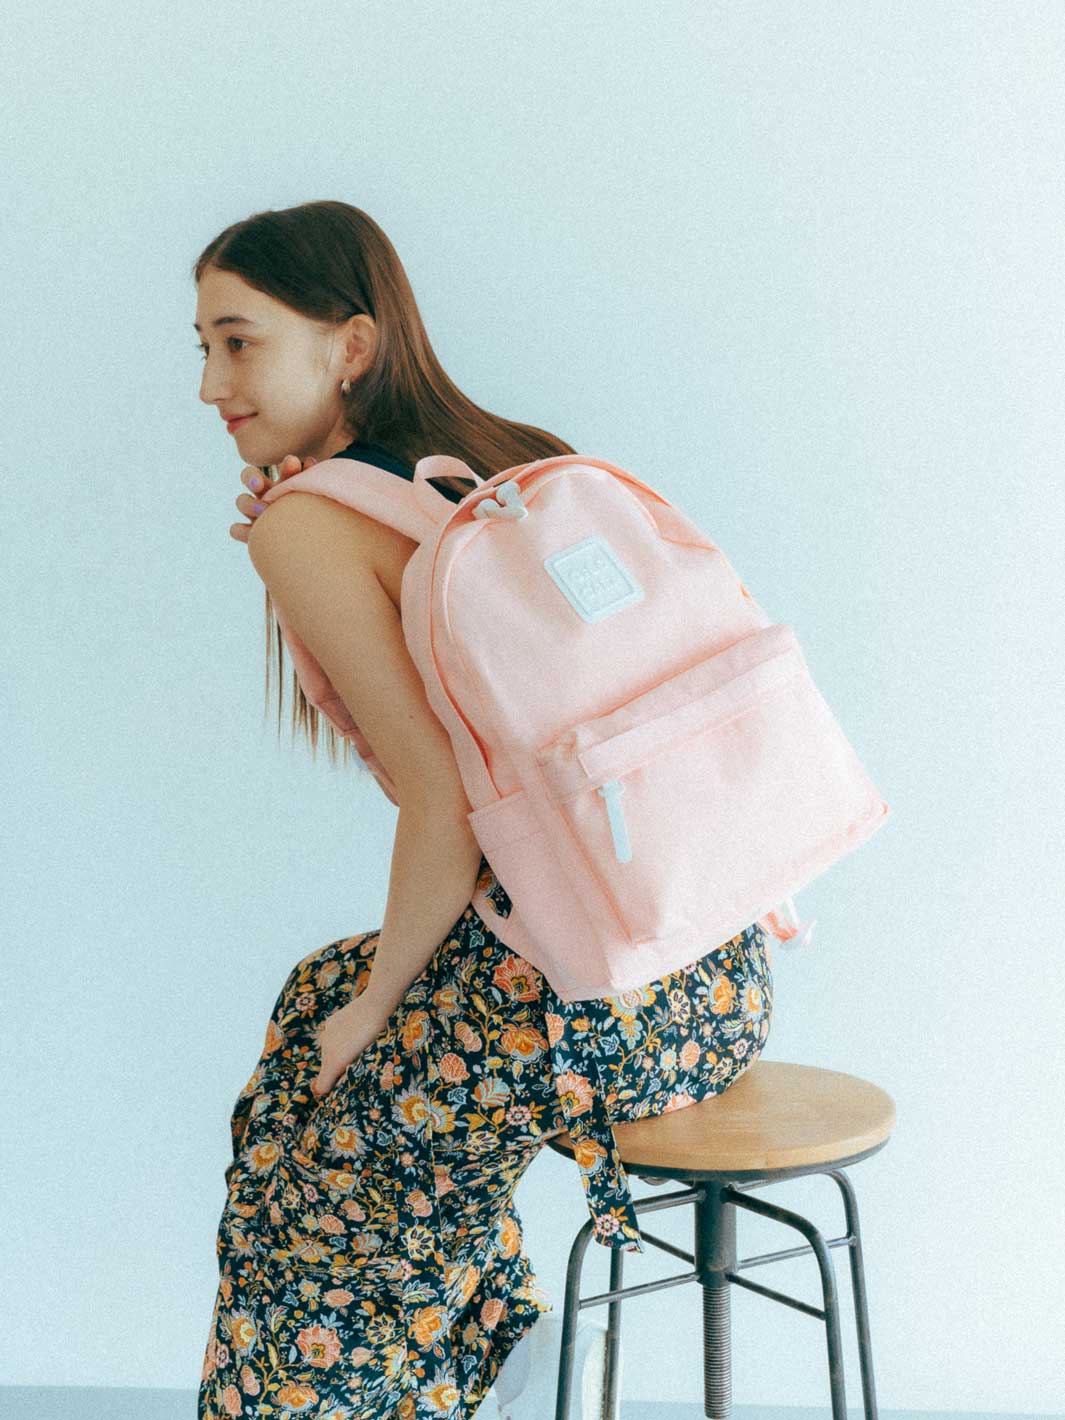 BACKPACK (MIDDLE)